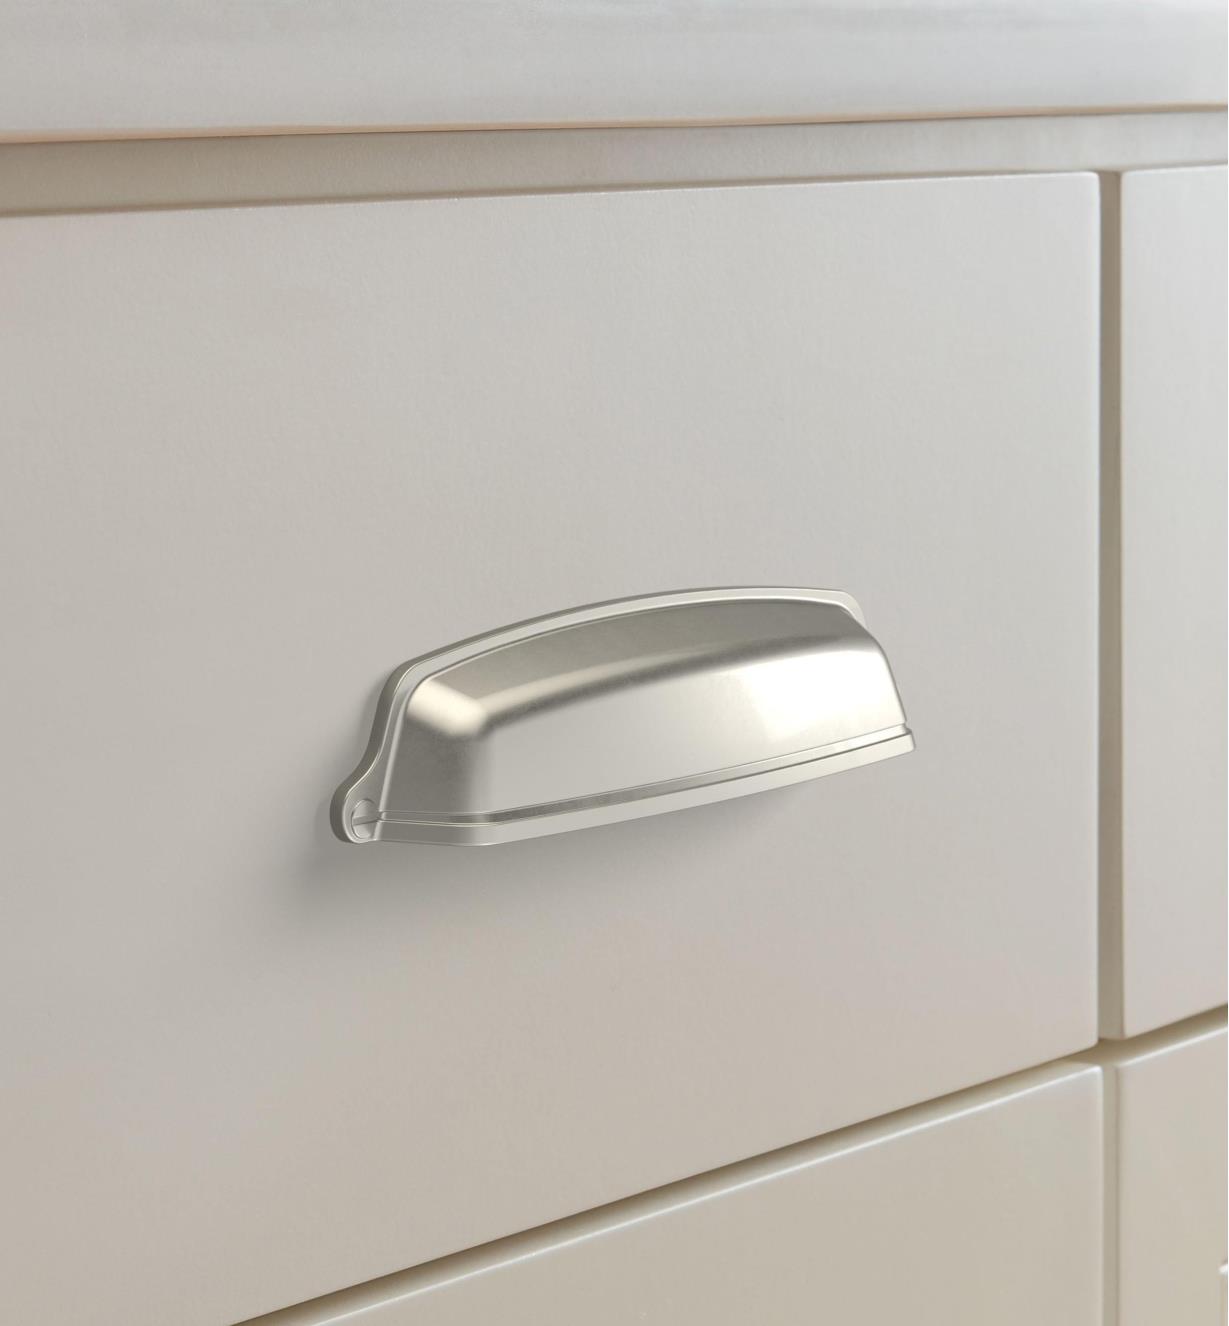 A satin nickel colored cup pull mounted horizontally on a drawer